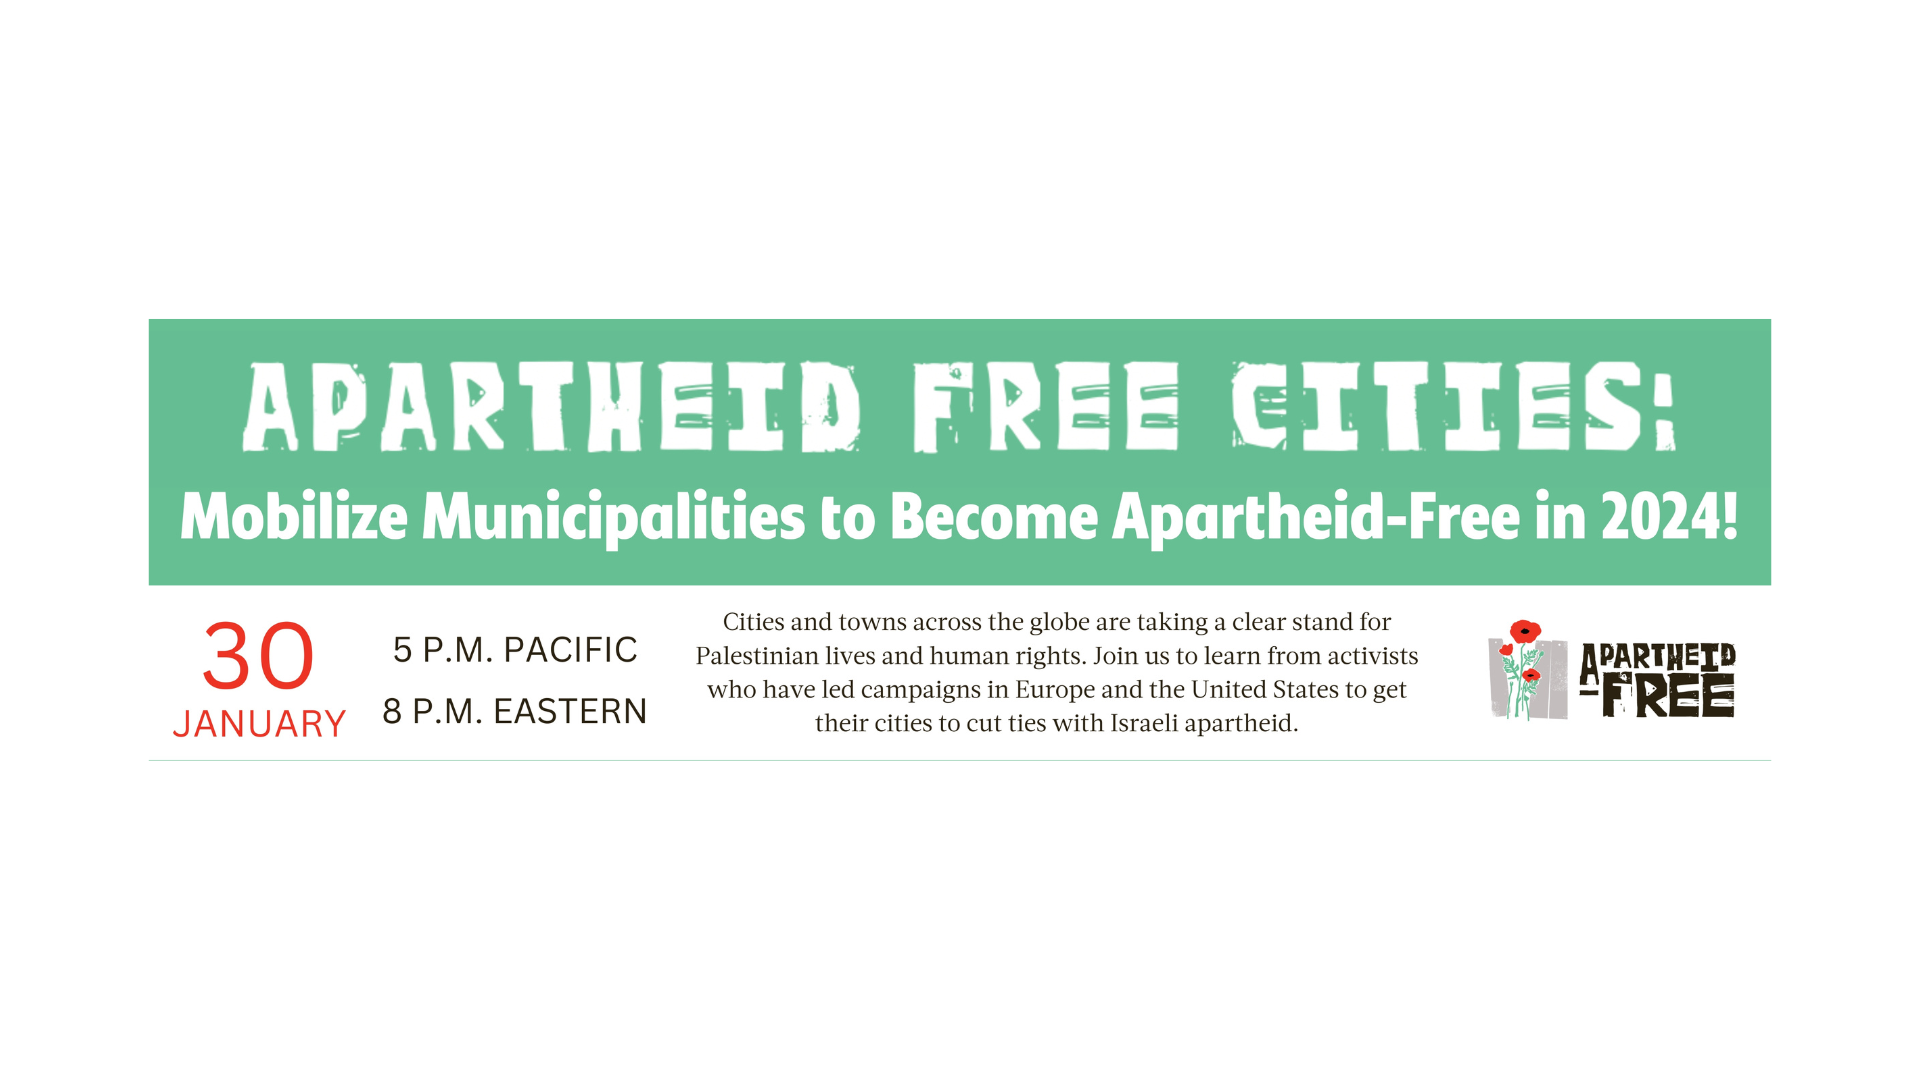 APARTHEID-FREE CITIES: Mobilize Municipalities to become Apartheid-Free in 2024